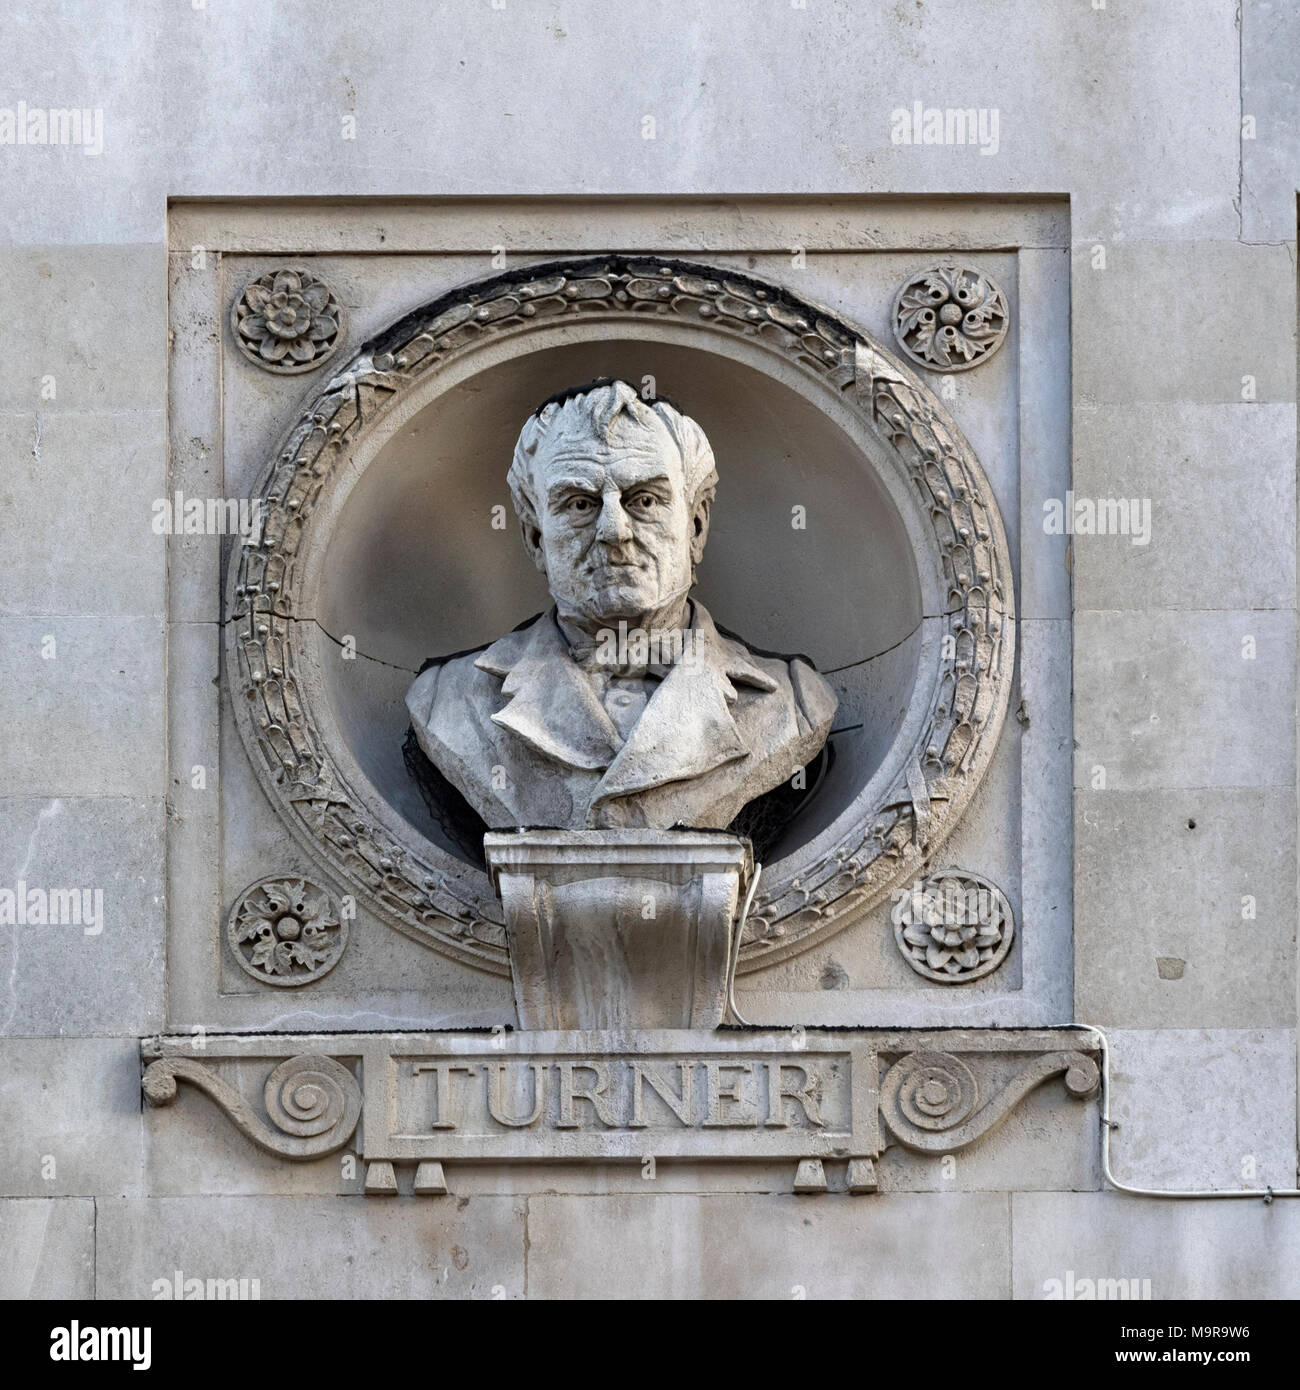 BUST OF J. M. W. TURNER (1775-1851): On the outside of the Royal Institute of Painters in Water Colour Building in Piccadilly, London Stock Photo